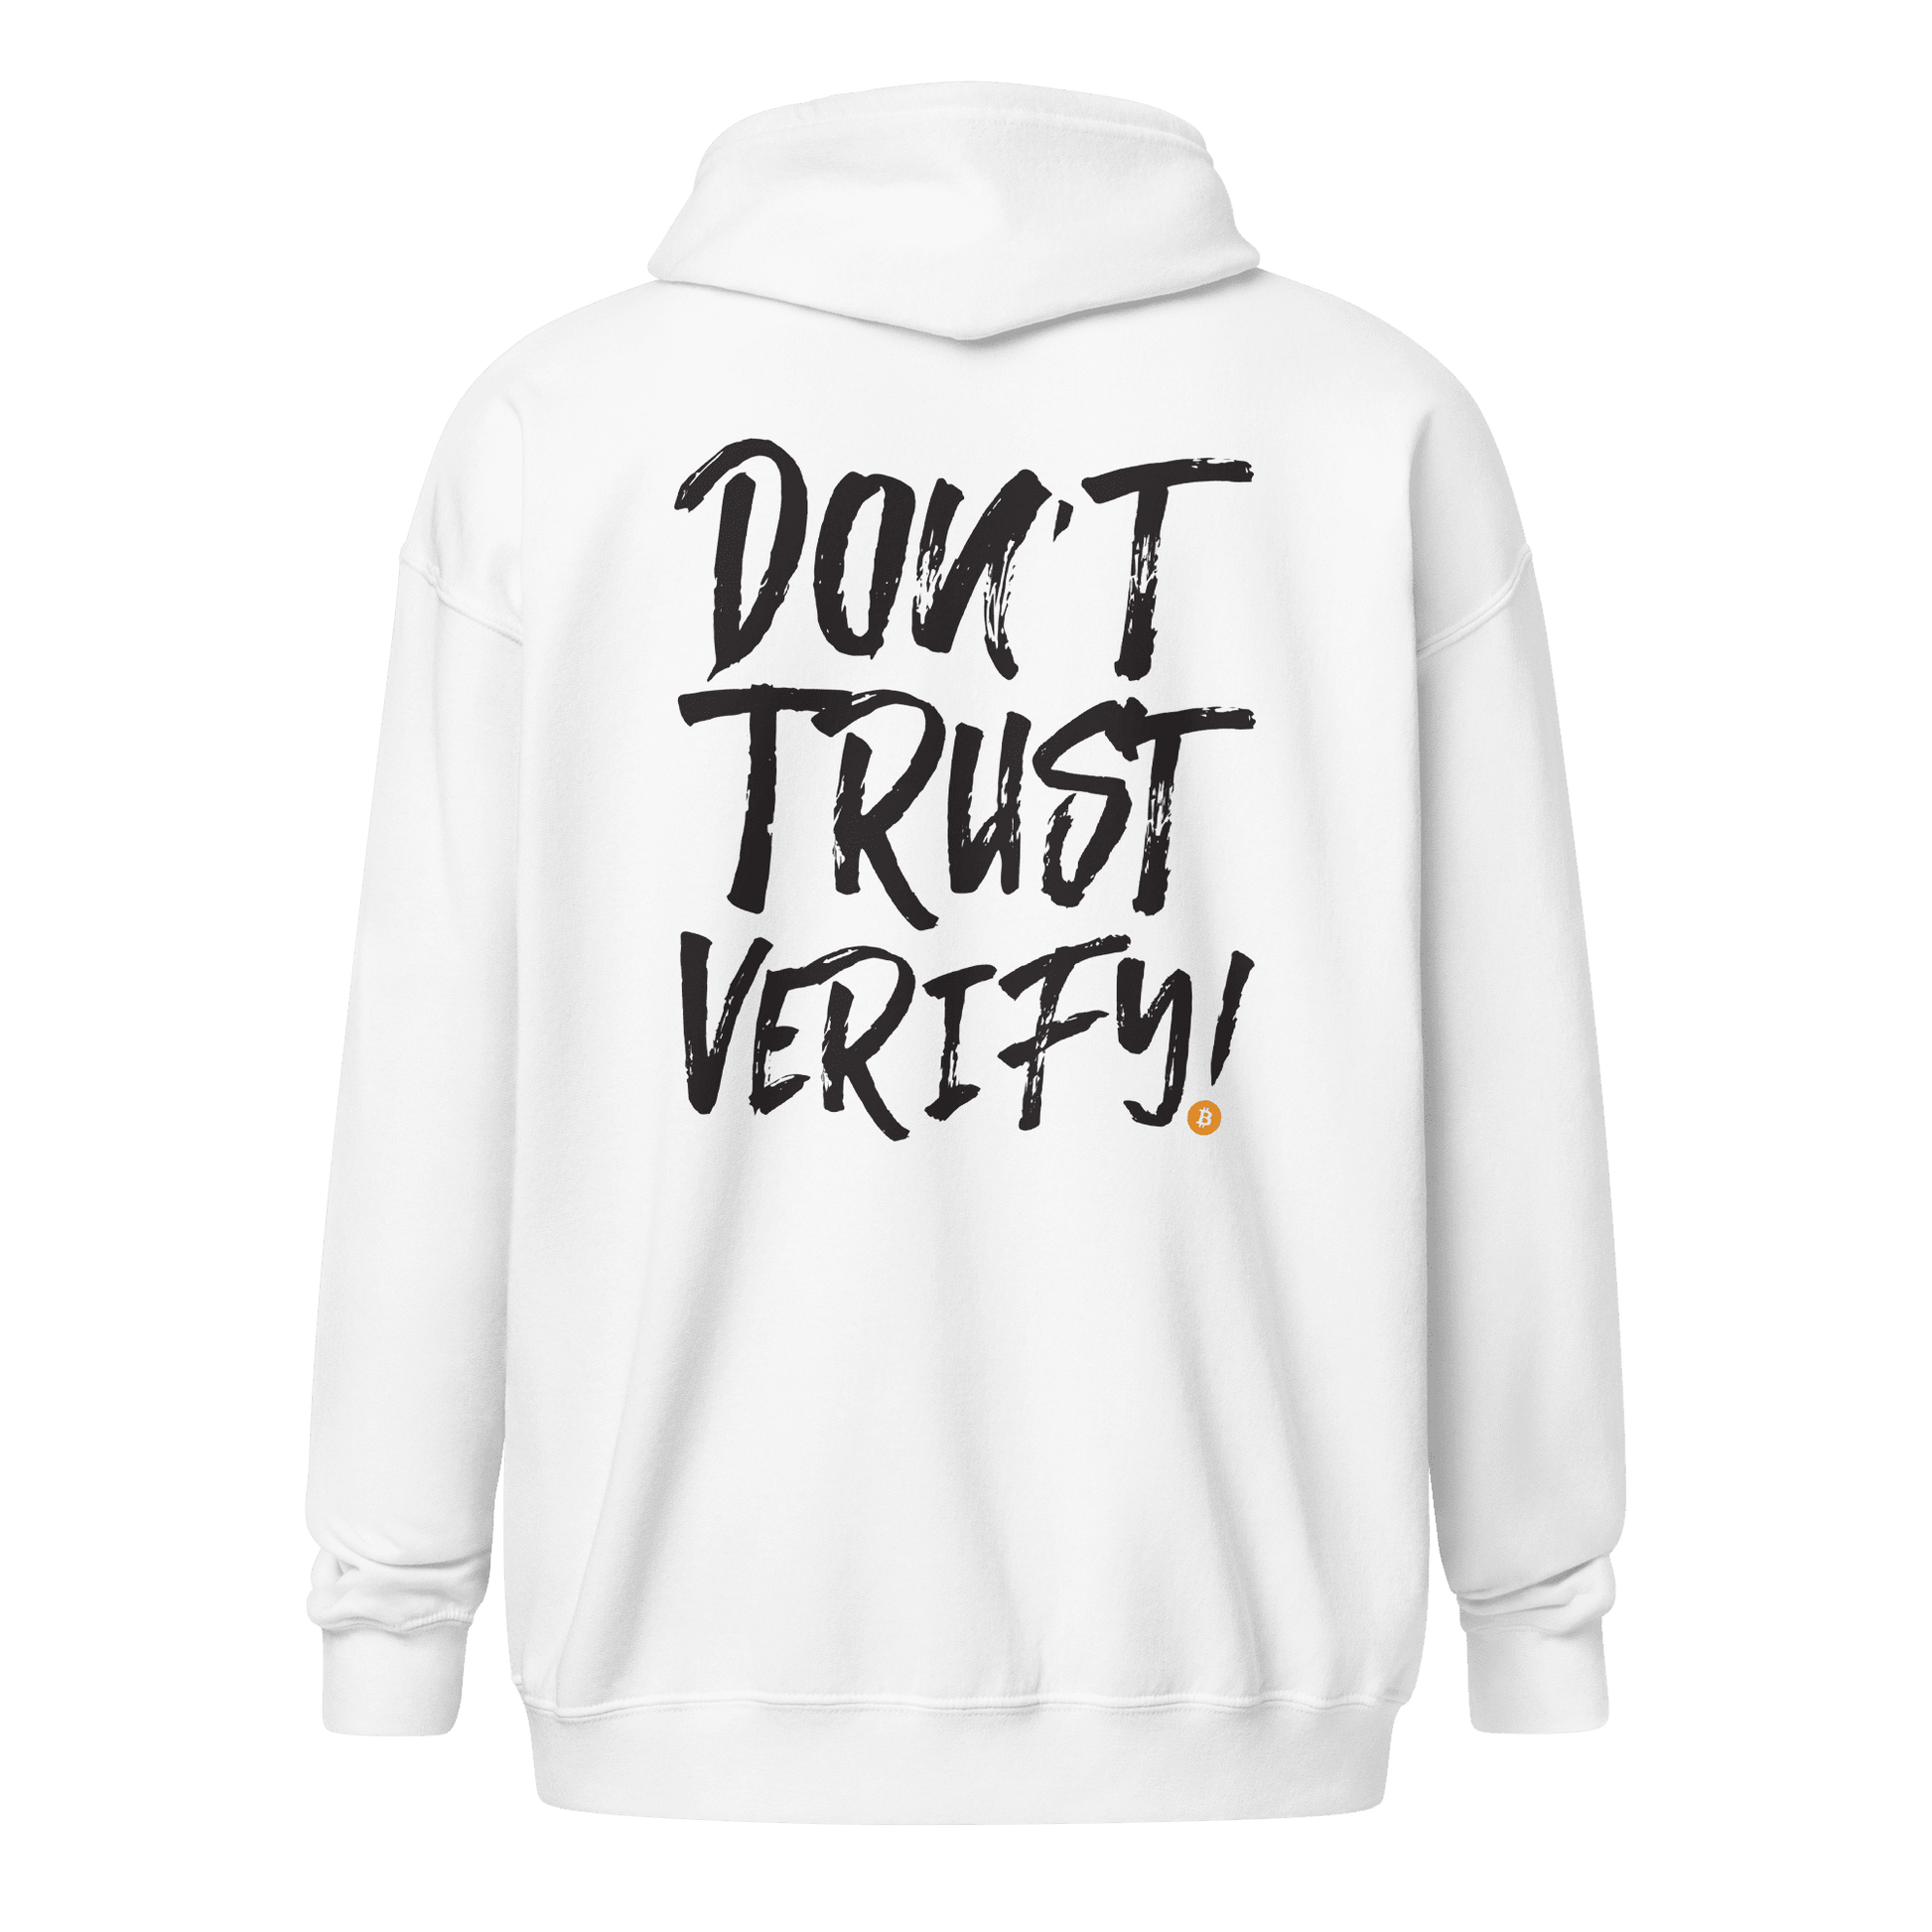 Back view of a white bitcoin zip hoodie.